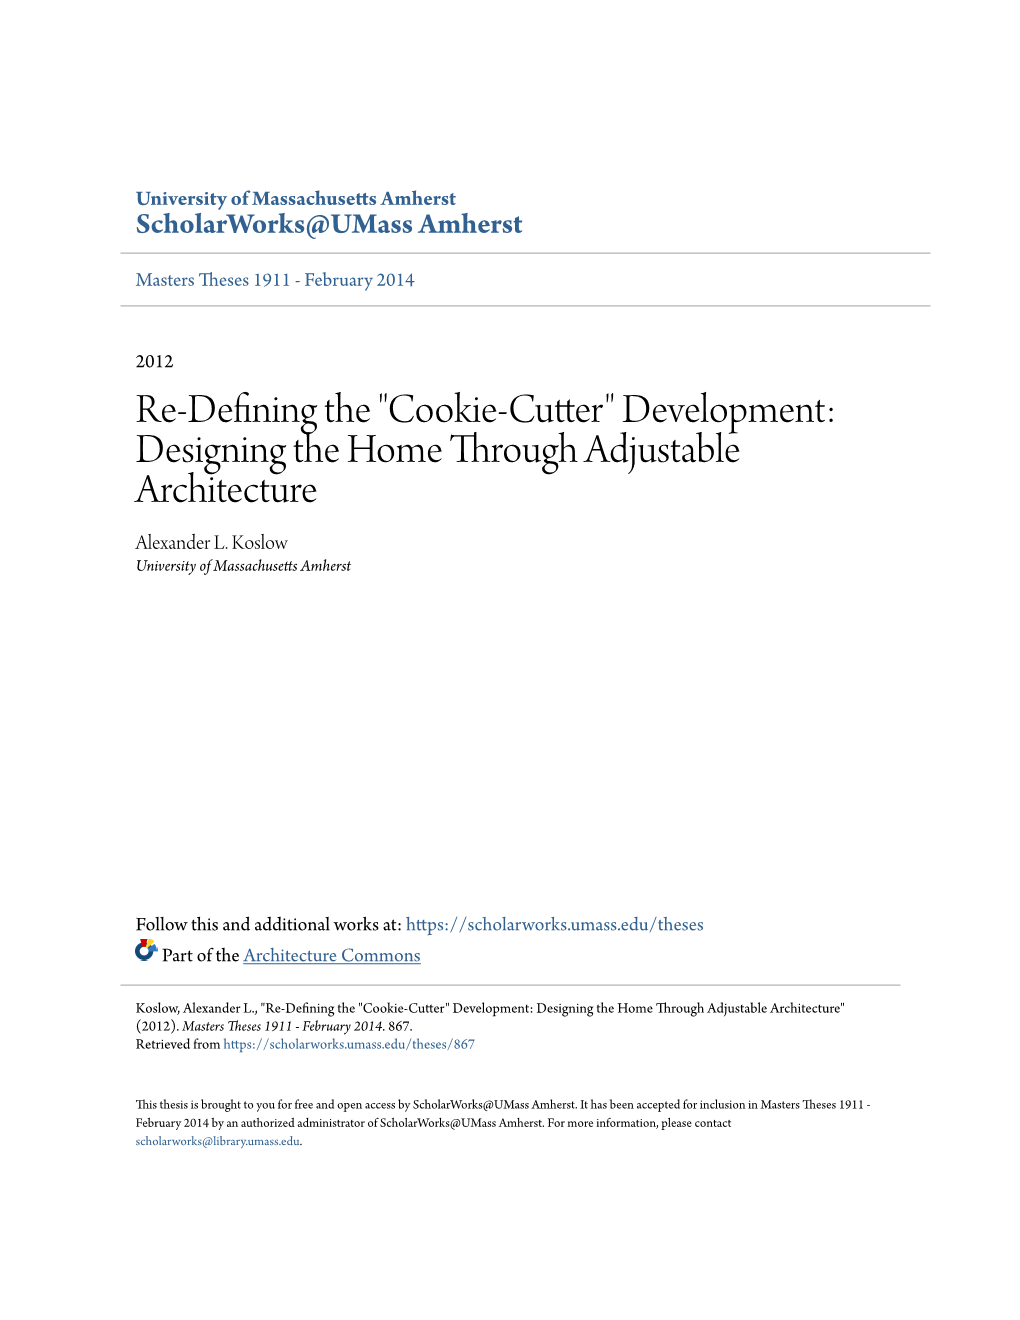 Re-Defining the "Cookie-Cutter" Development: Designing the Home Through Adjustable Architecture Alexander L